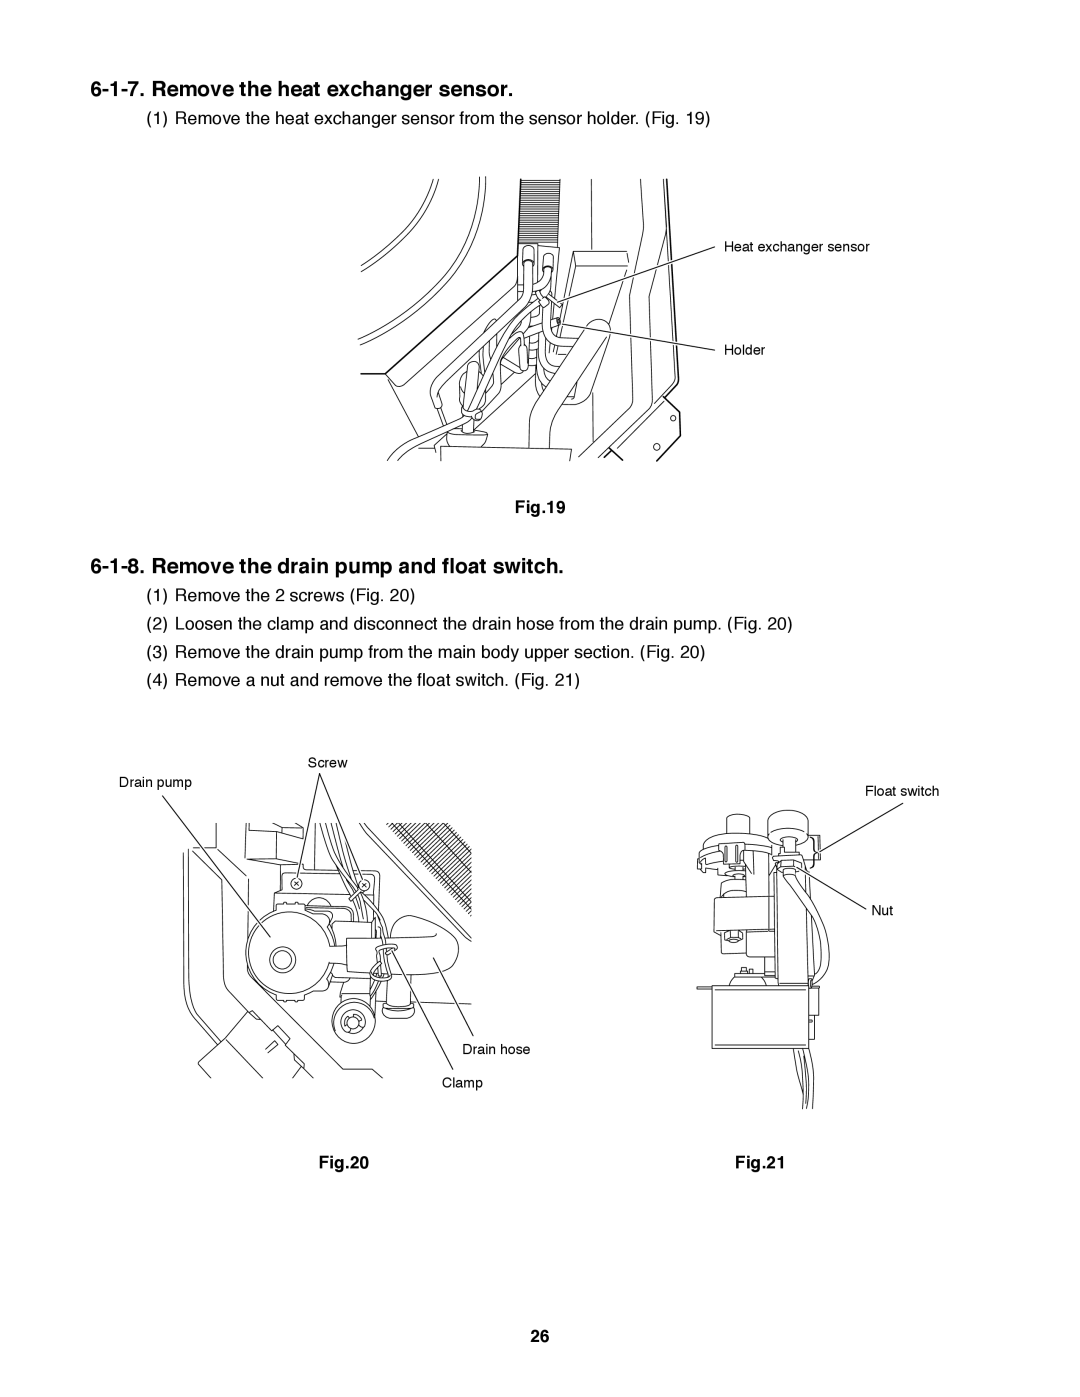 Sanyo XMHS0972, XMHS1272 service manual Remove the heat exchanger sensor, Remove the drain pump and float switch 